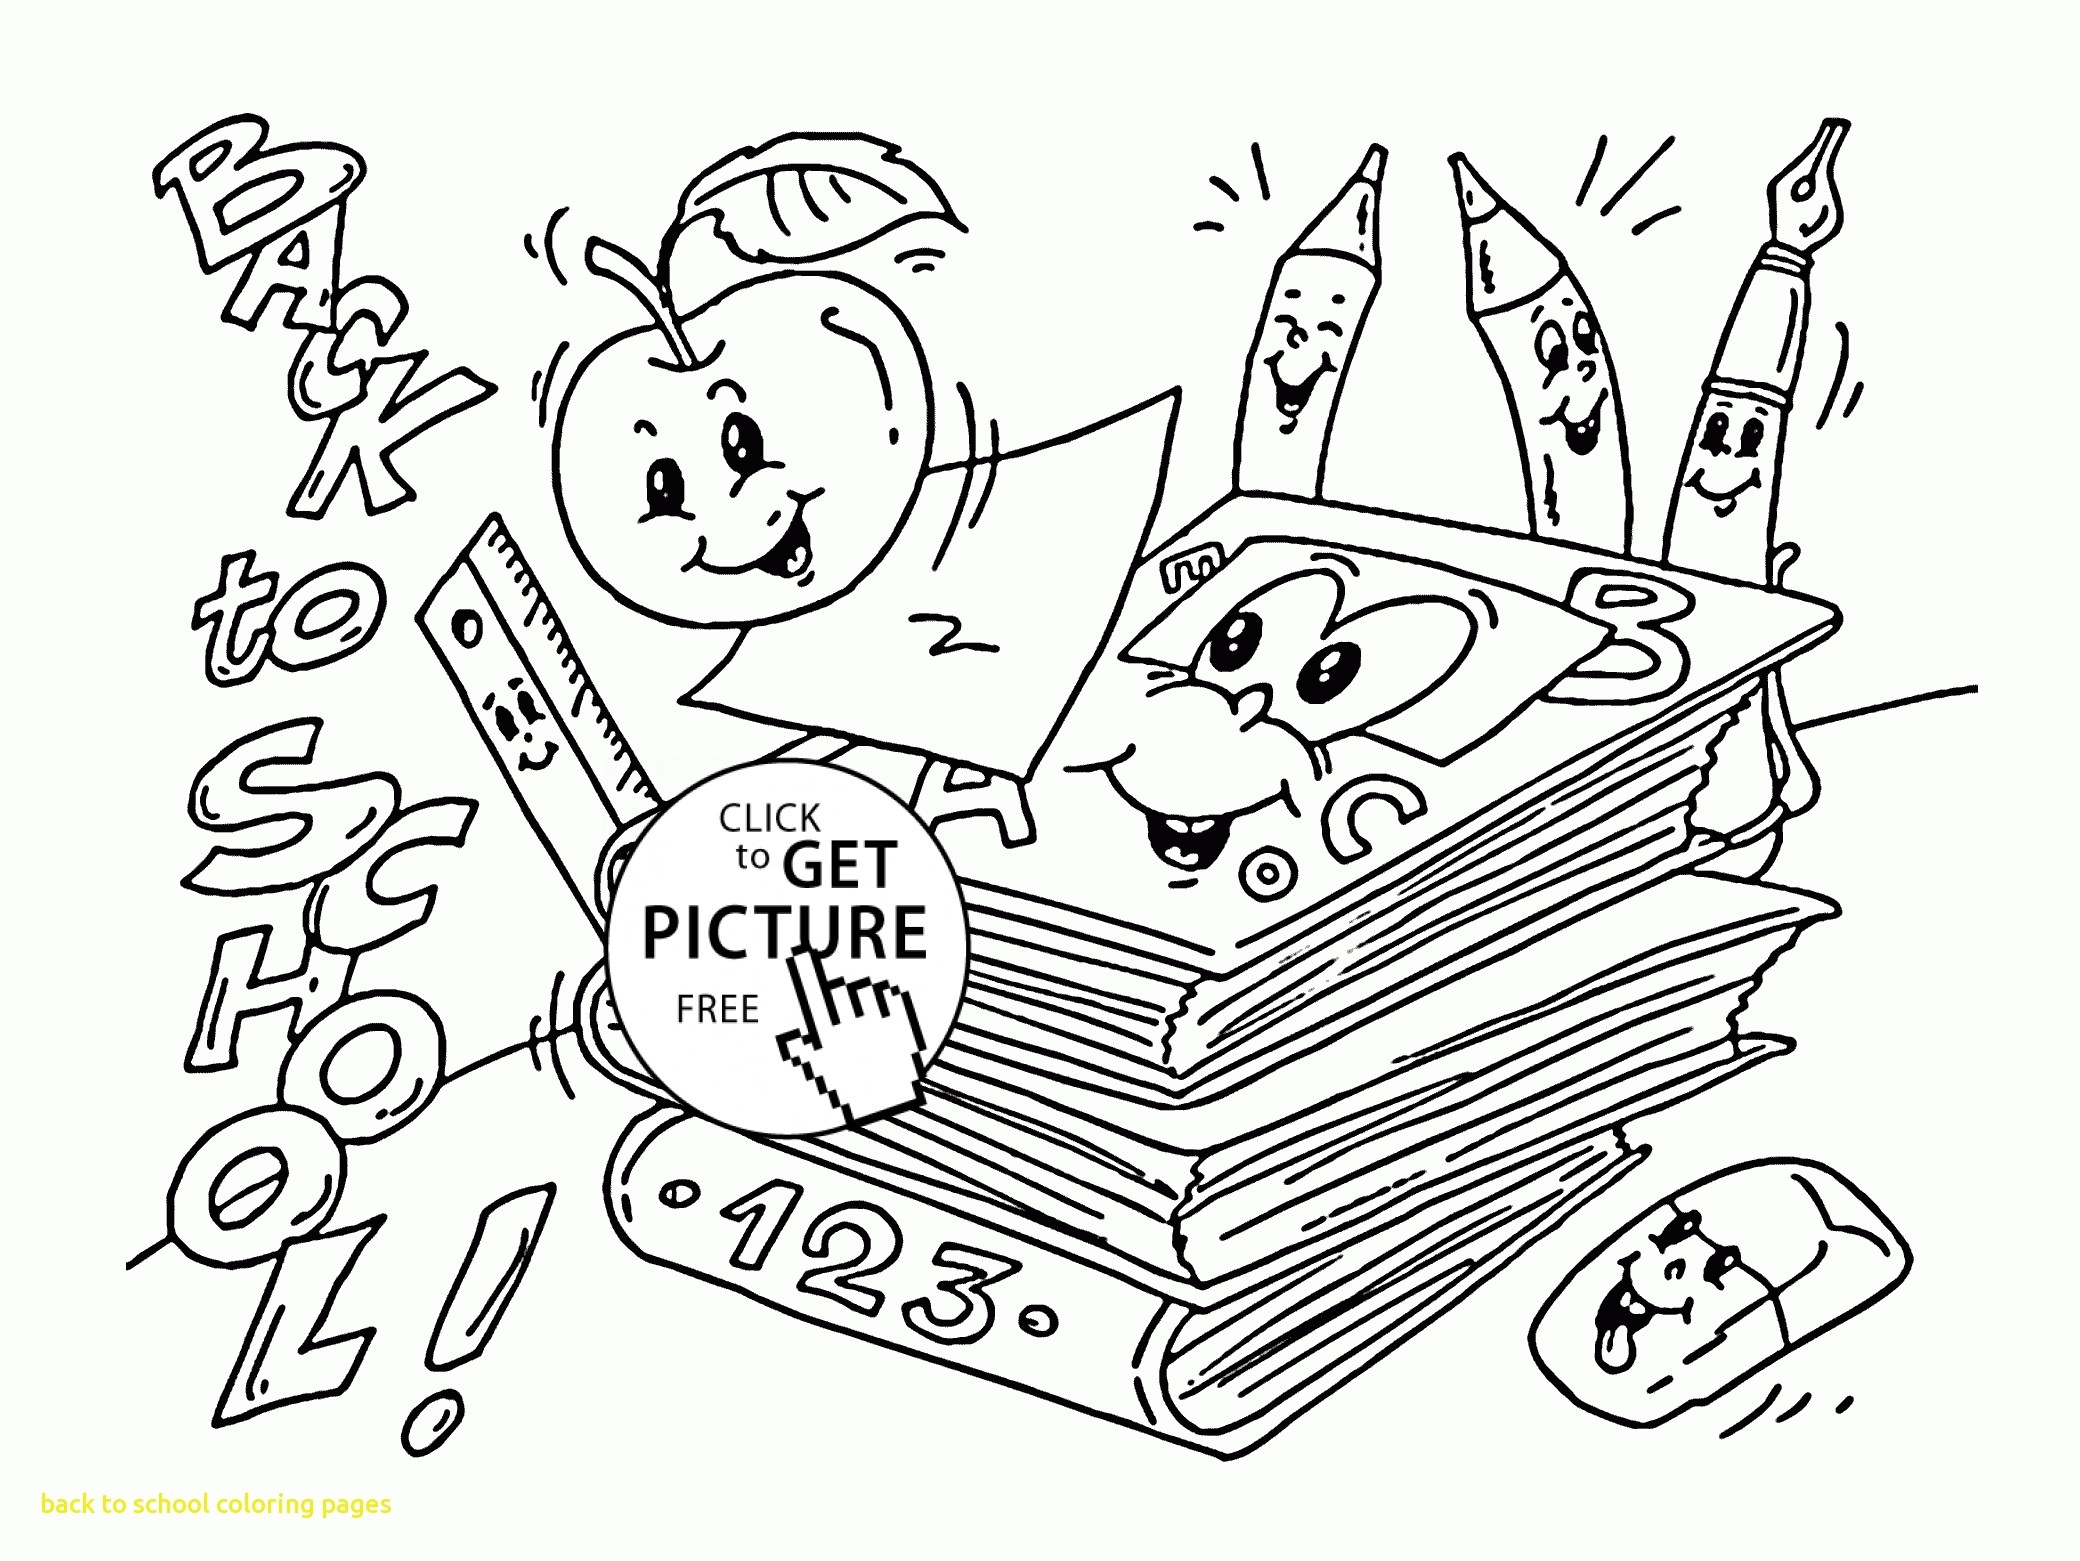 End Of School Coloring Pages At GetColorings Free Printable Colorings Pages To Print And Color